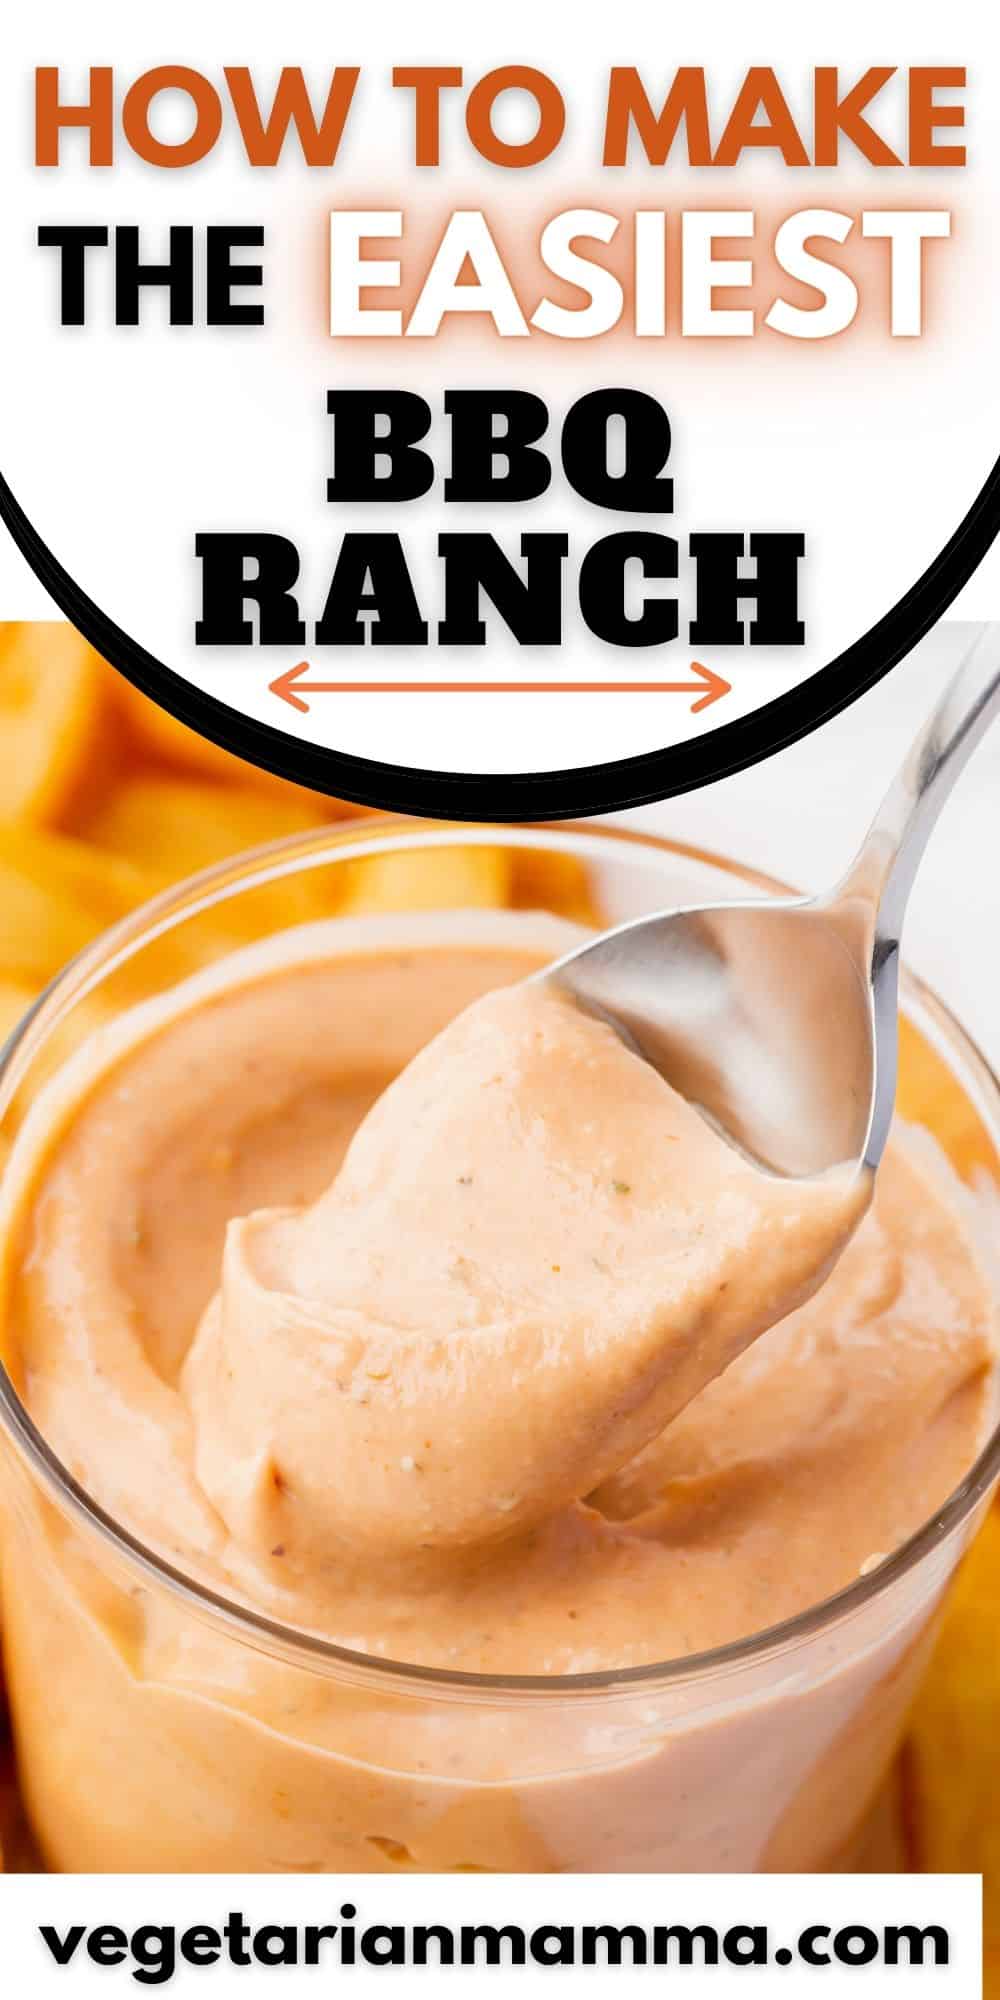 a glass jar filled with creamy bbq flavored ranch dip. Text box at top says "how to make the easiest bbq ranch"